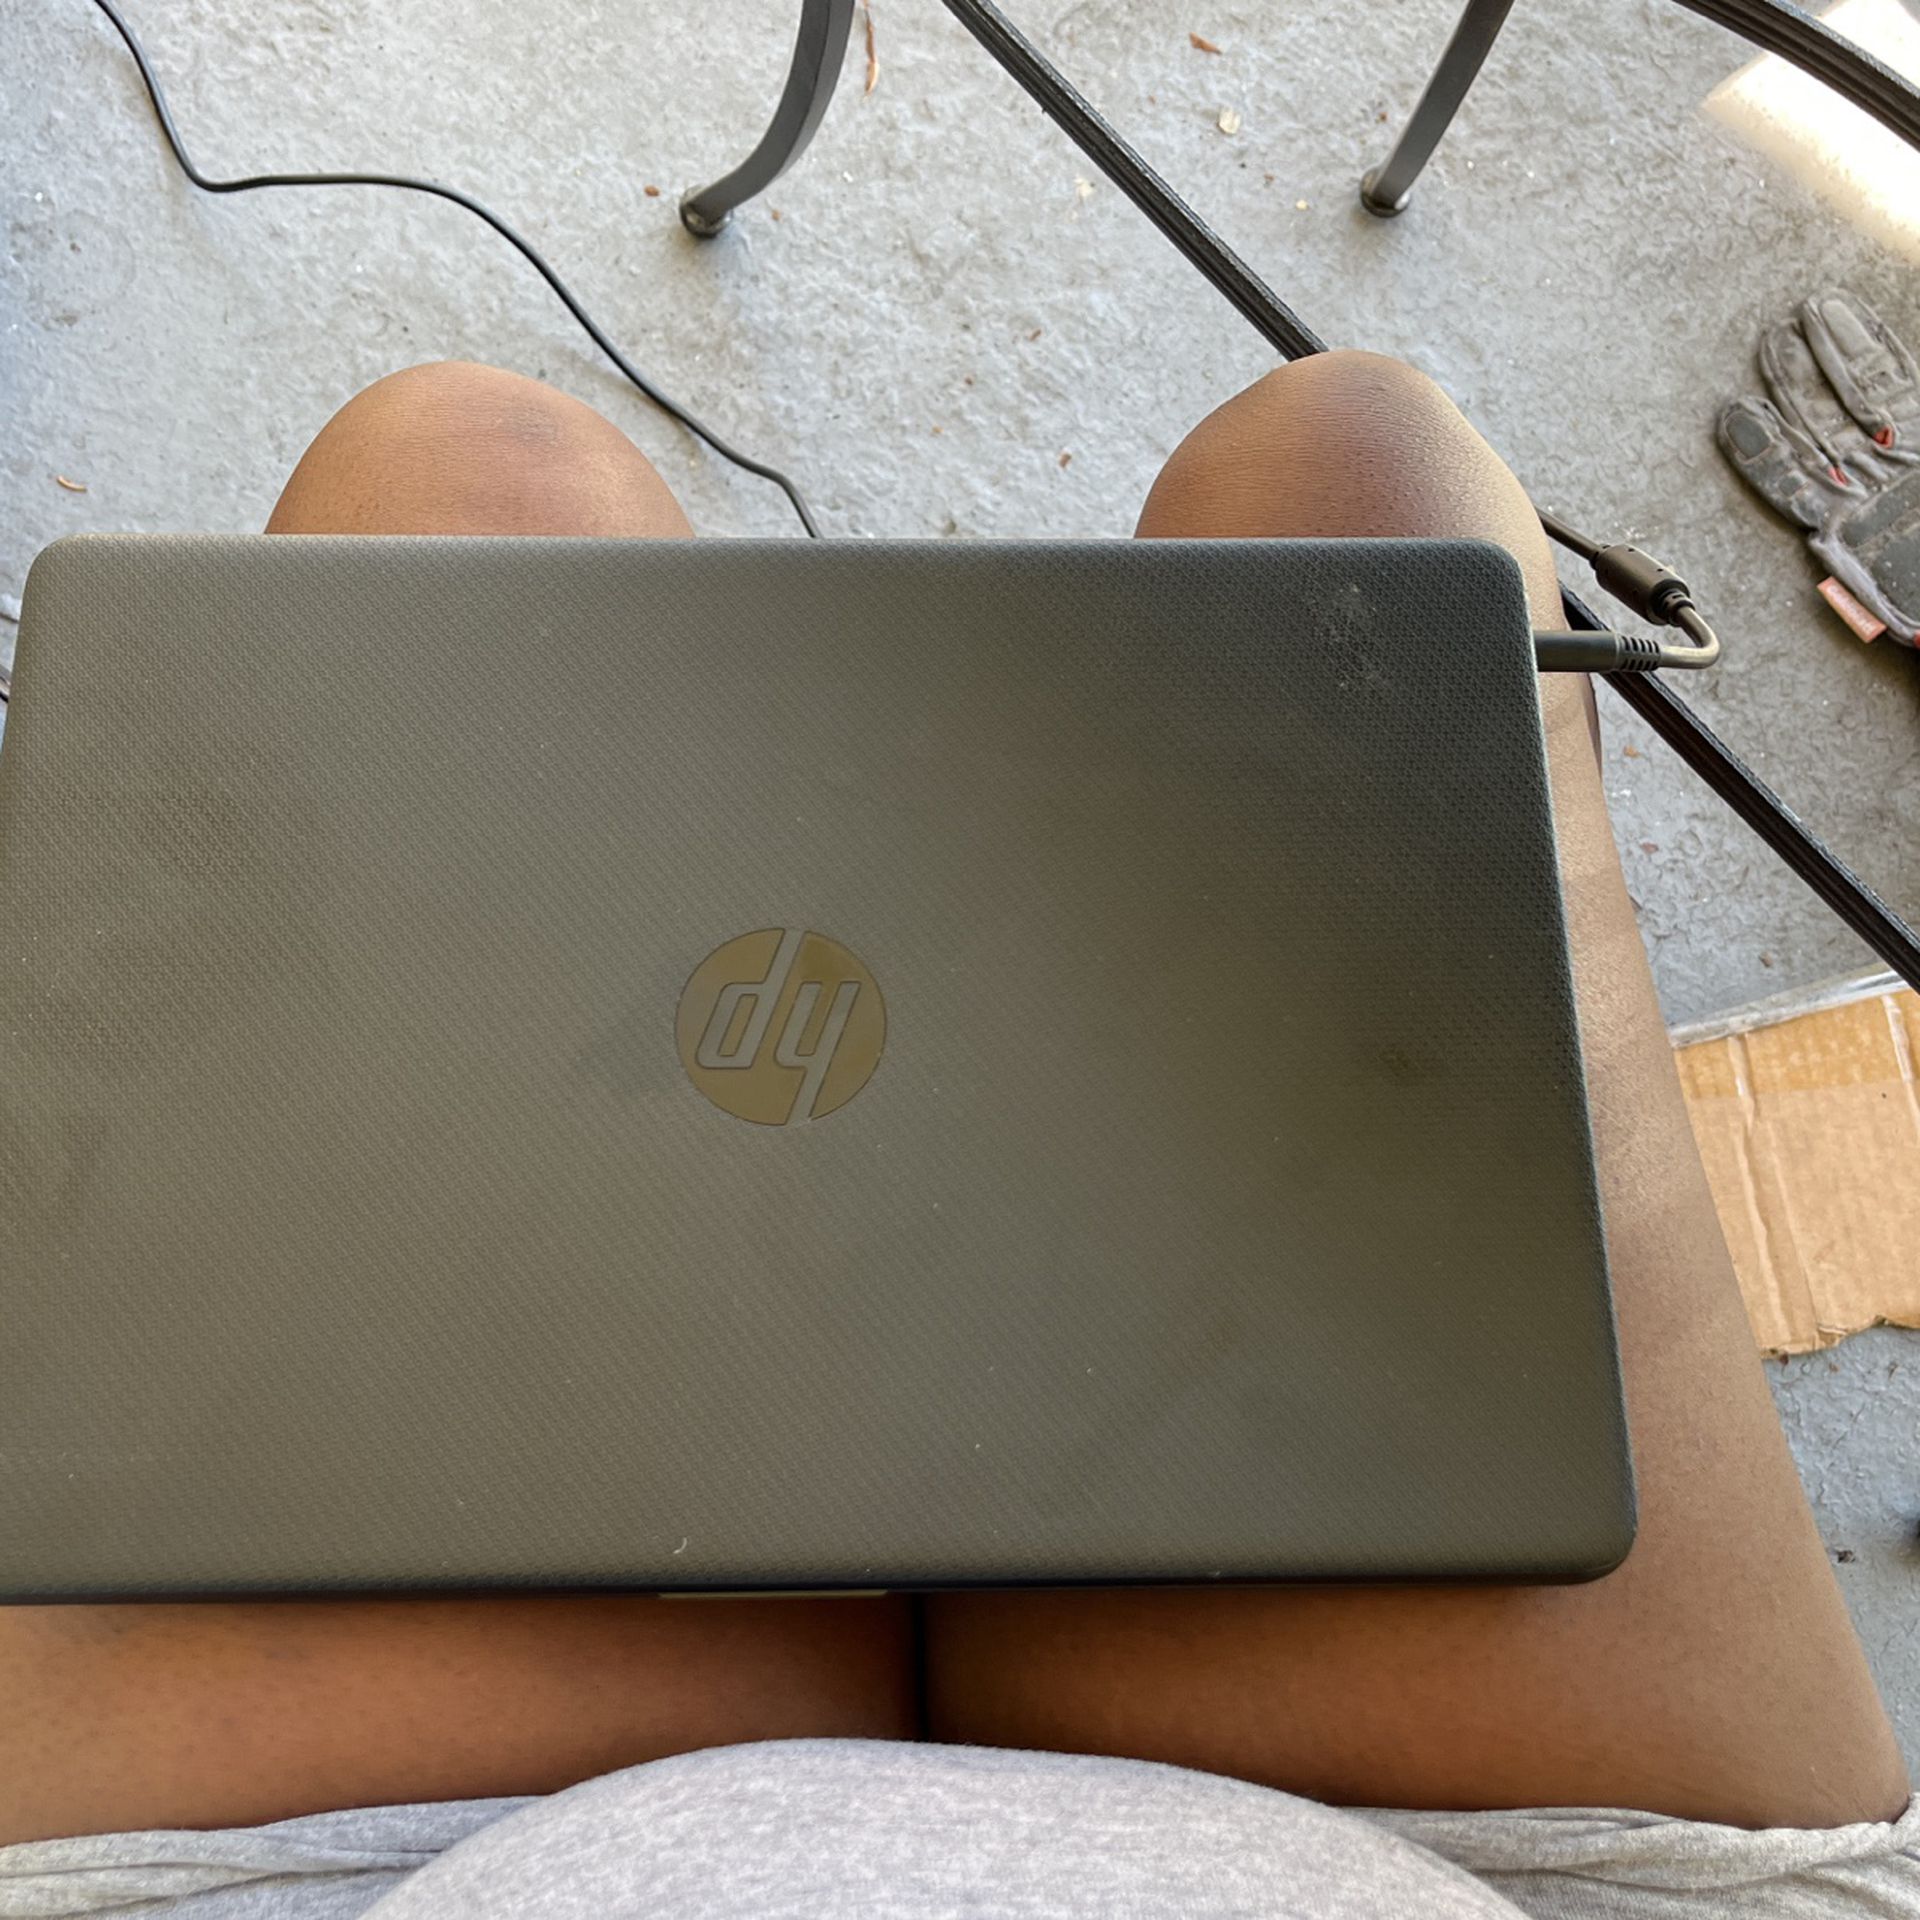 HP LAPTOP W/ Charger